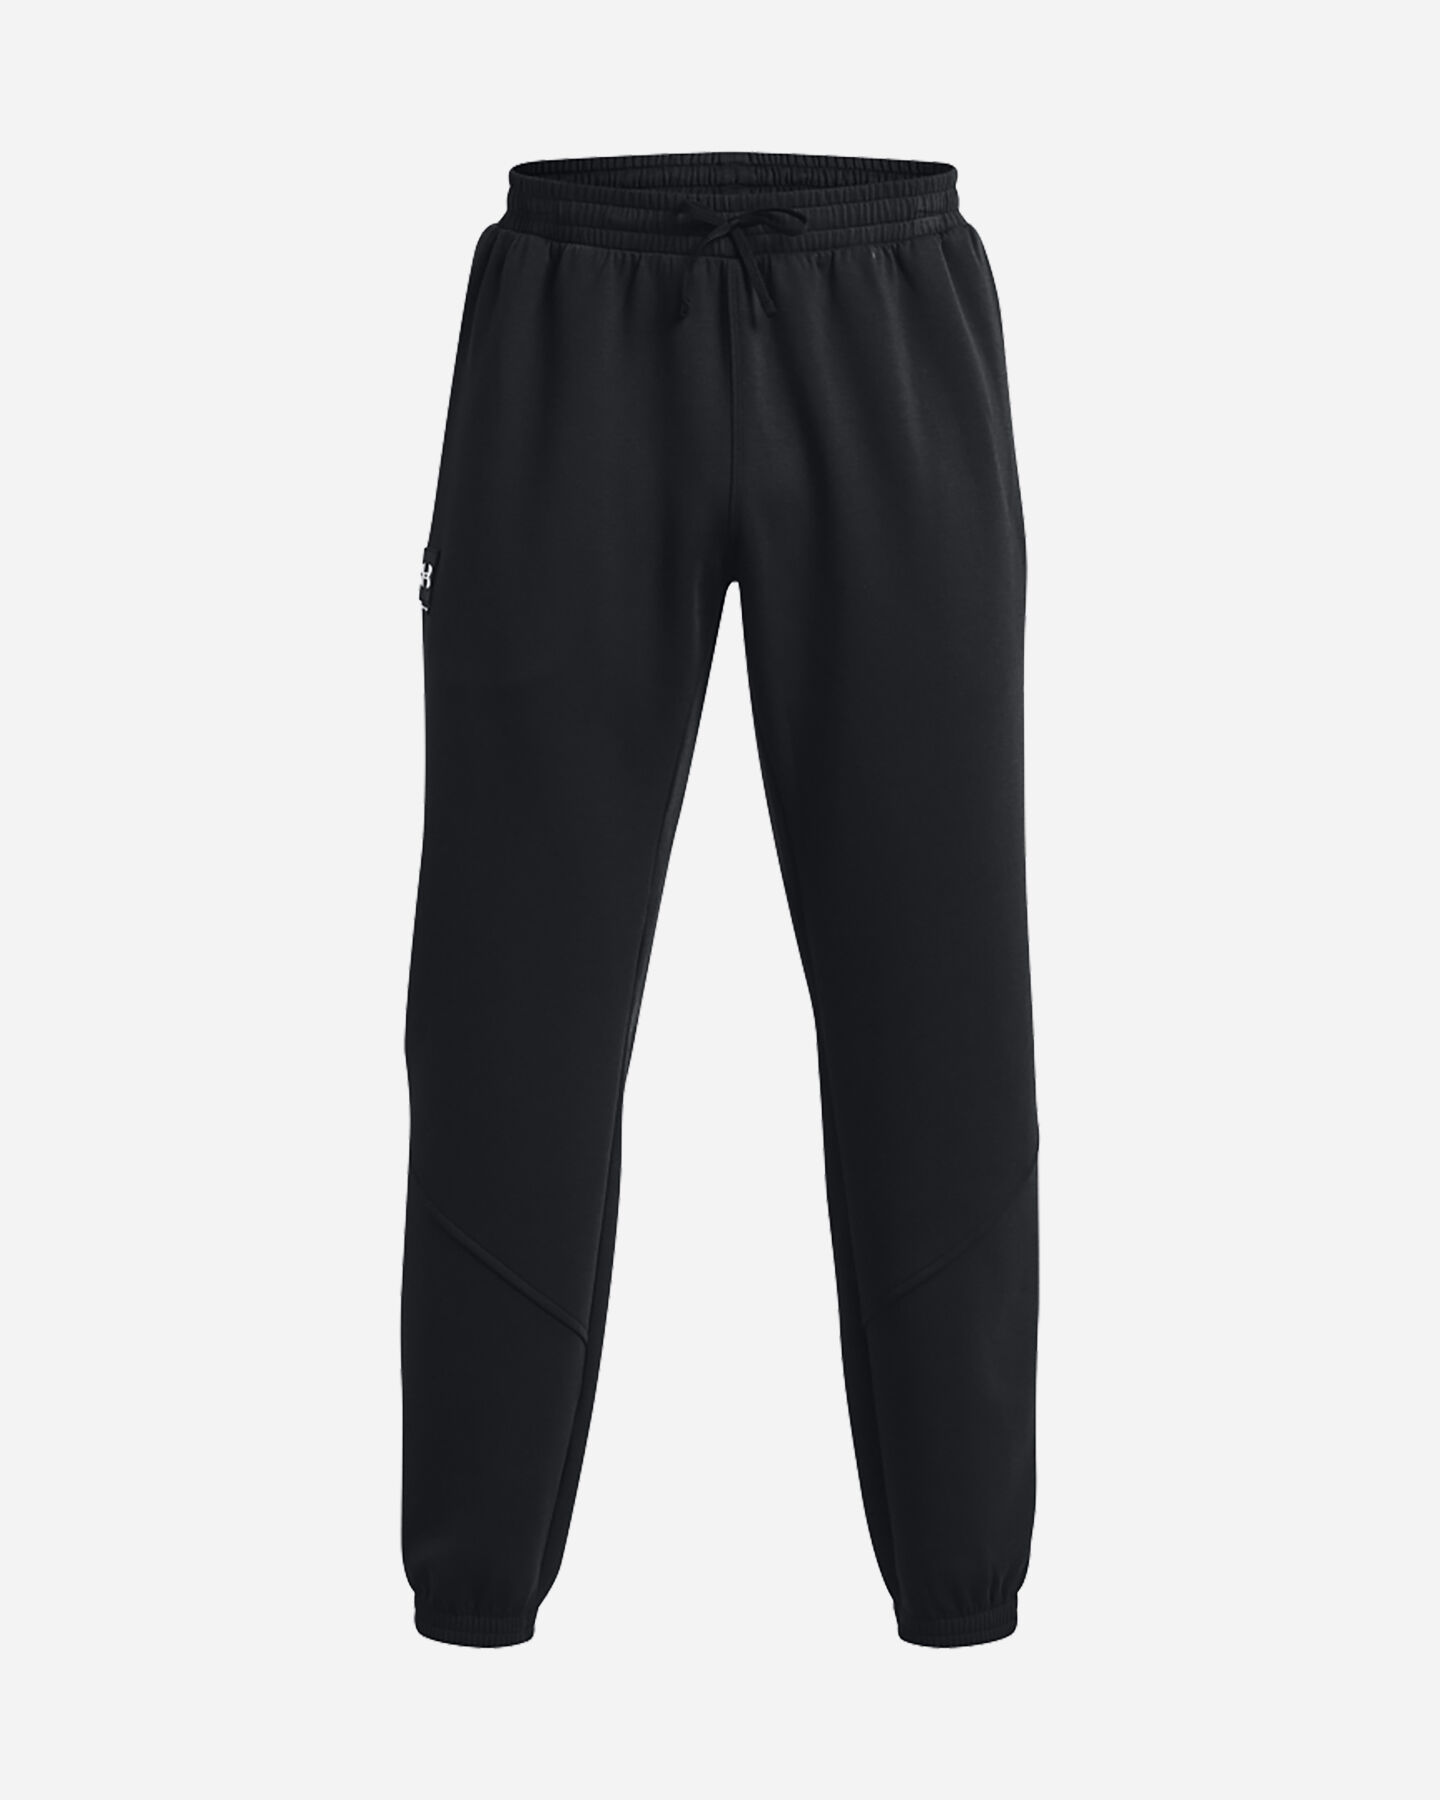  Pantalone UNDER ARMOUR SUMMIT KNIT M S5459284|0001|XS scatto 0